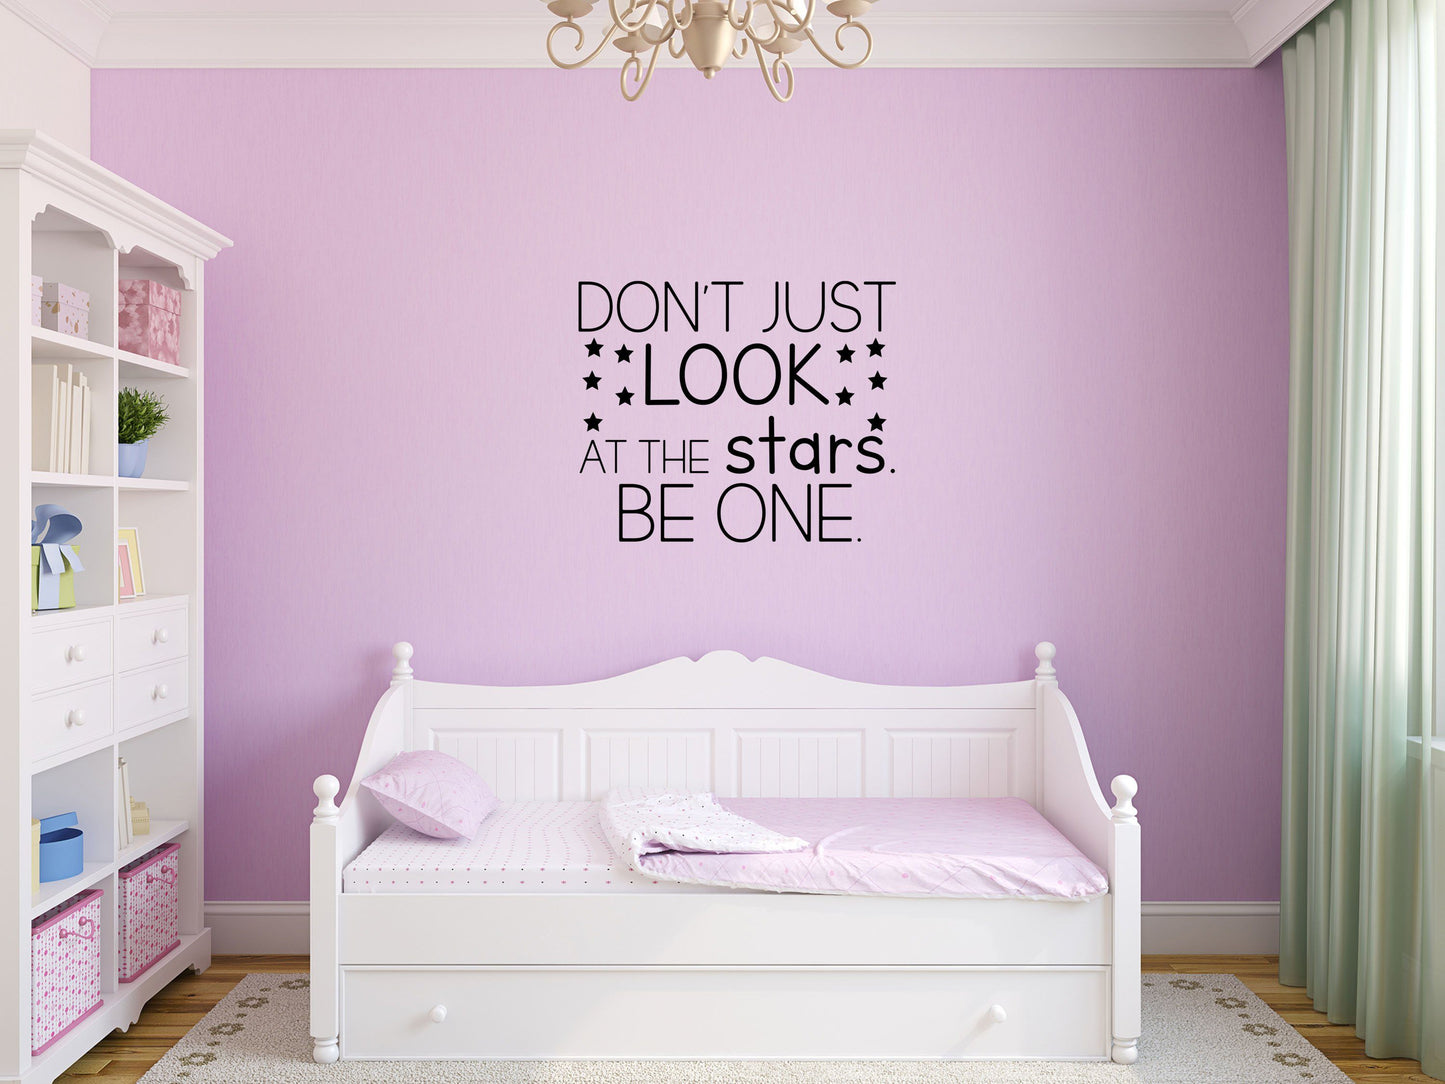 Be A Star Decal - Be A Star Decor - Star Wall Decal - Don't Just Look At The Stars Decor - Stars Wall Art Vinyl Wall Decal Inspirational Wall Signs 